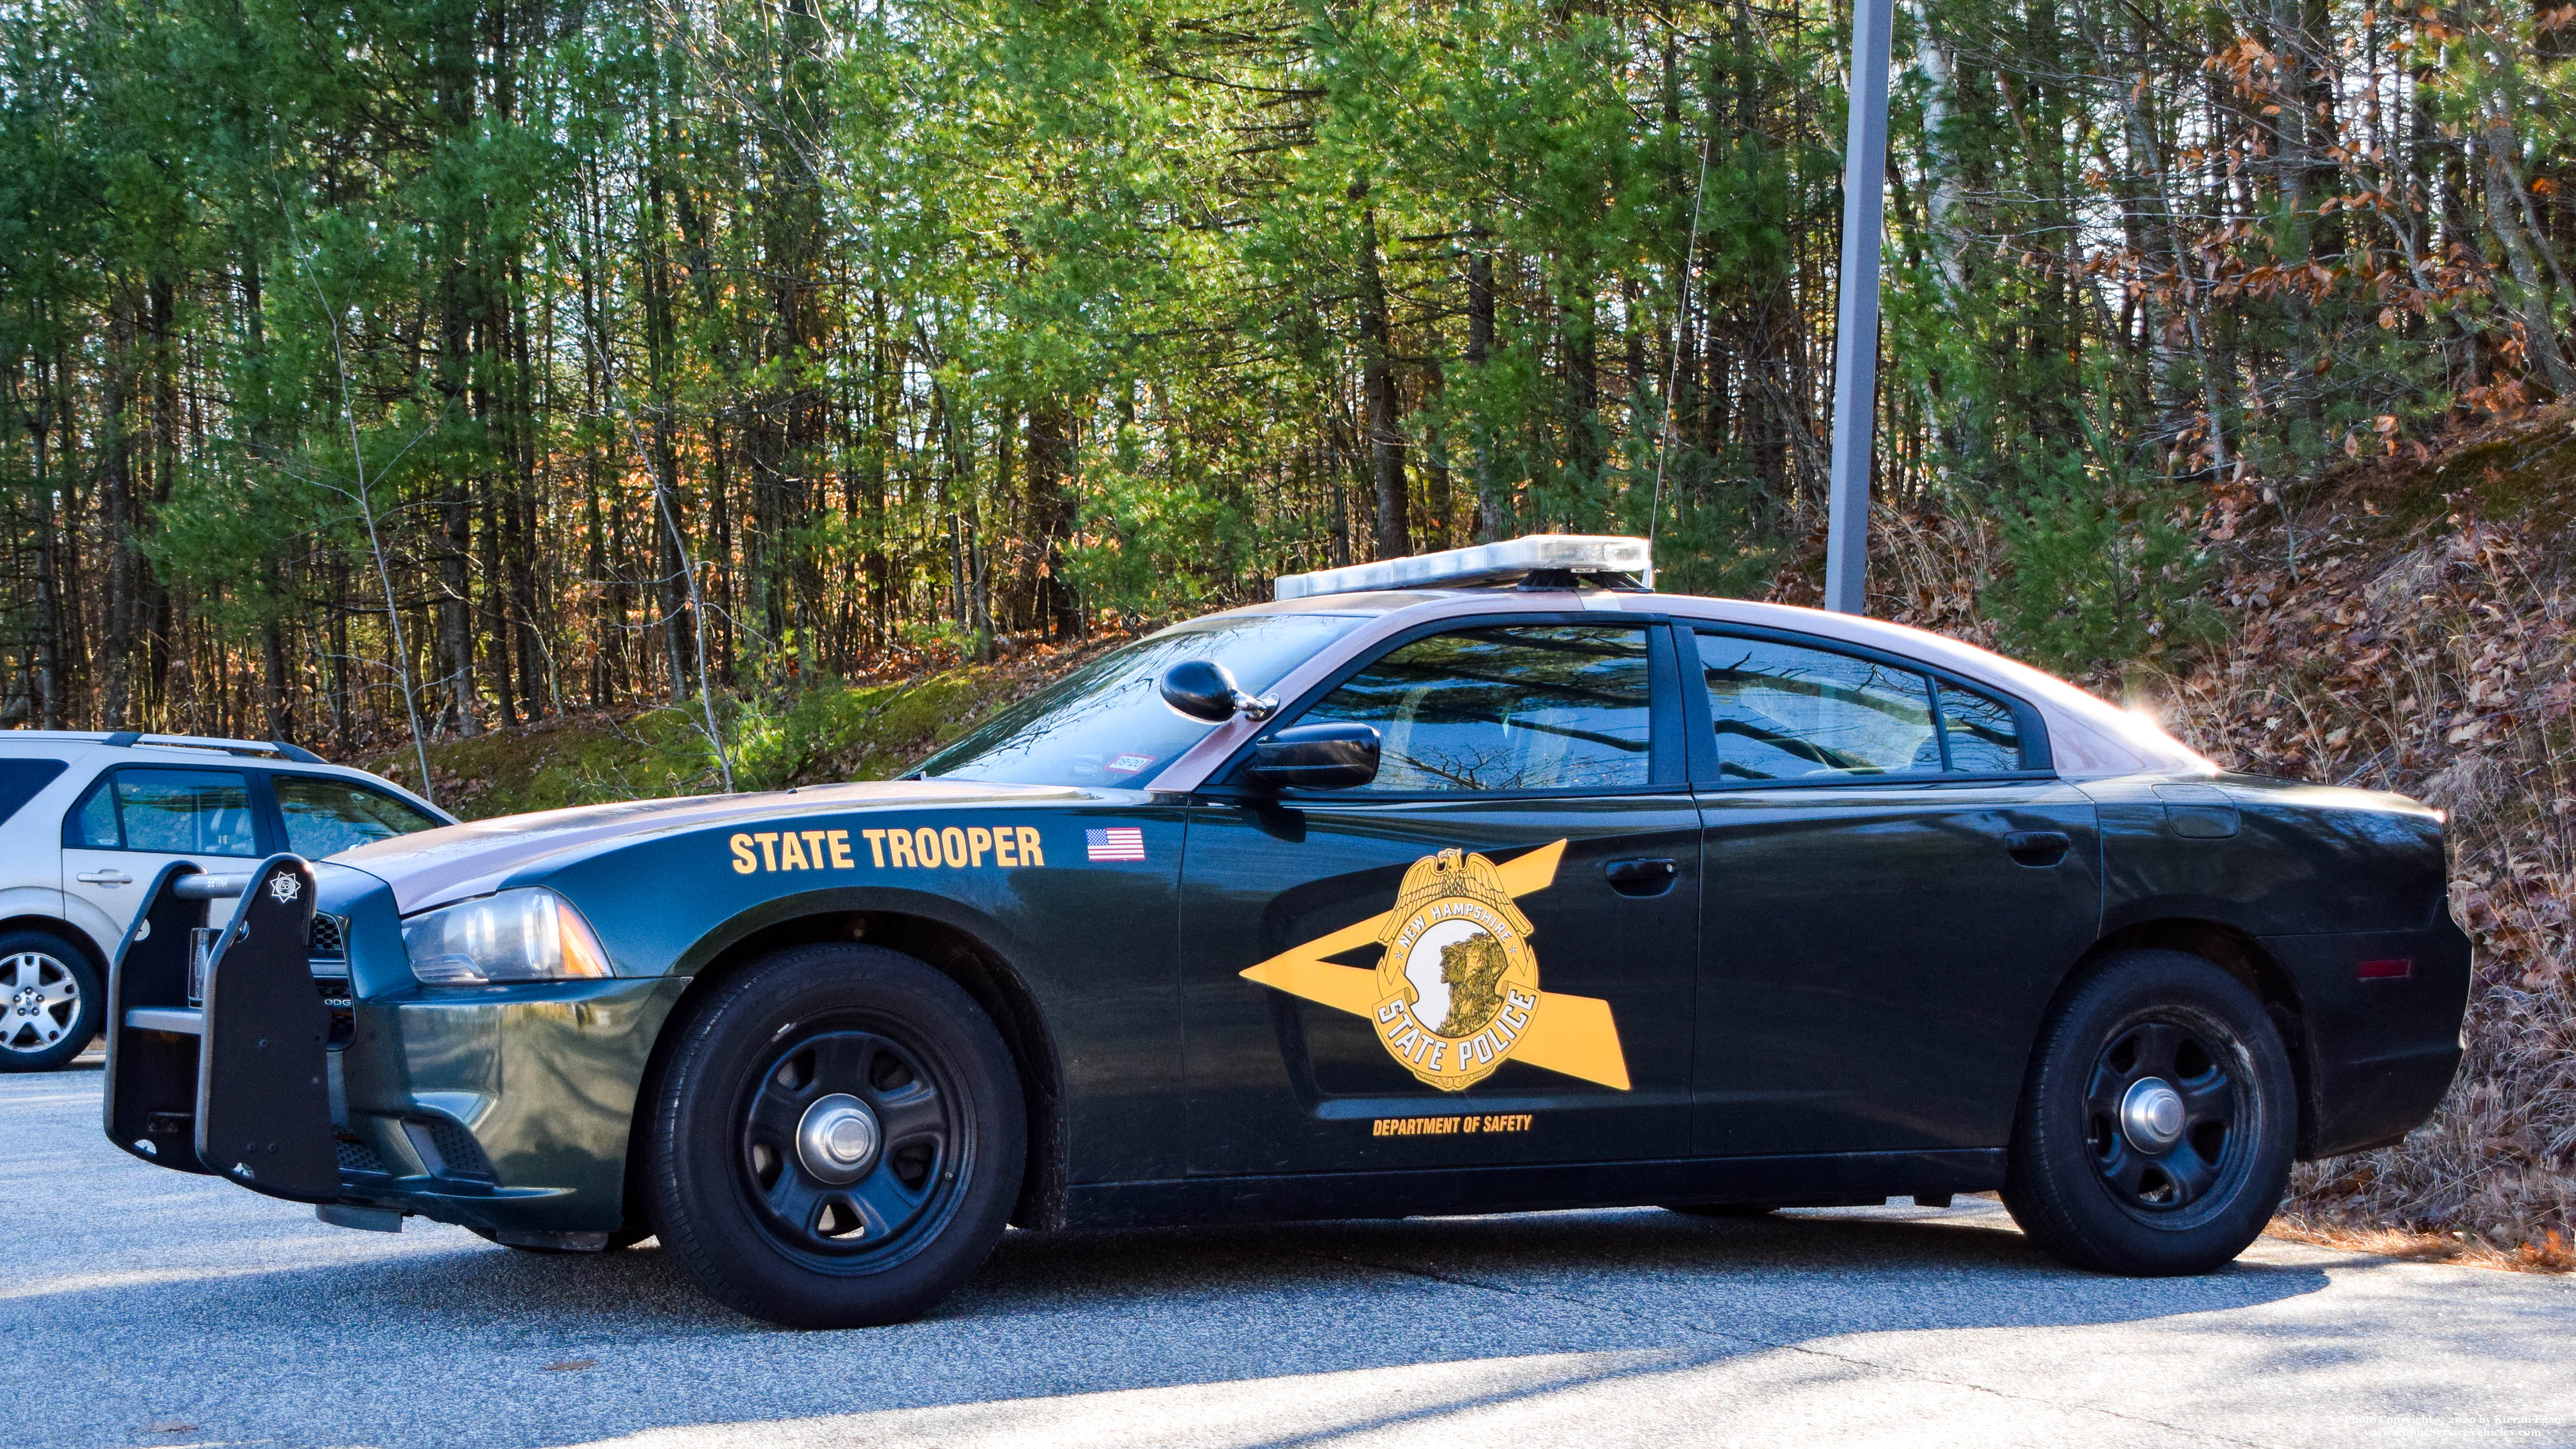 A photo  of New Hampshire State Police
            Cruiser 491, a 2011-2014 Dodge Charger             taken by Kieran Egan